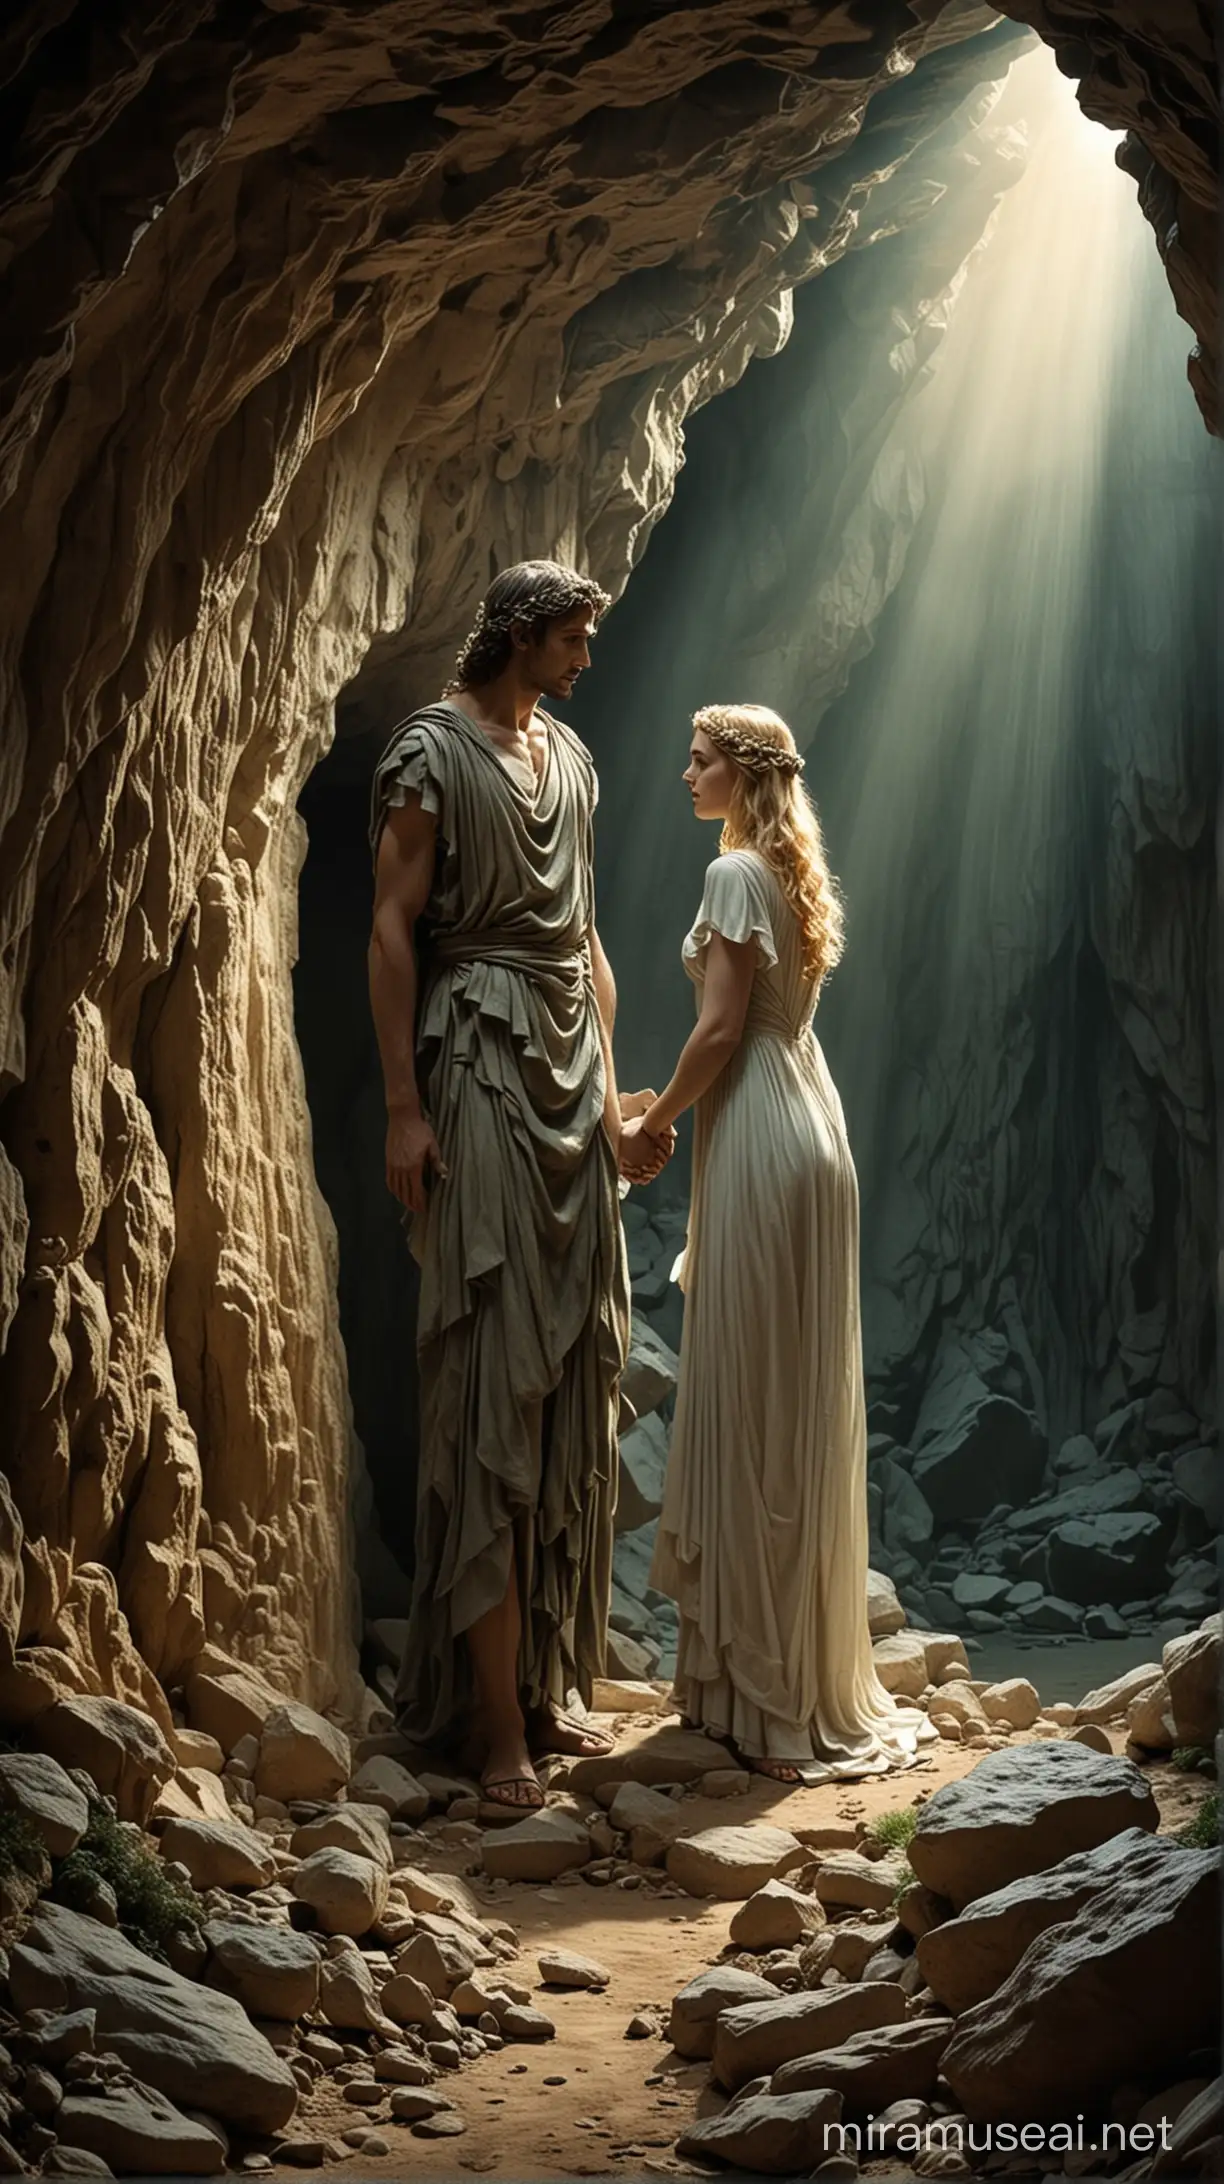 Orpheus and Eurydice are in a dimly lit cave. Orpheus climbed to the top of the cave and was a few steps away from leaving the cave. Eurydice is a few steps behind Orpheus. Eurydice looks on before Orpheus leaves the cave. Because of the curse, Eurydice slowly begins to turn into a statue.